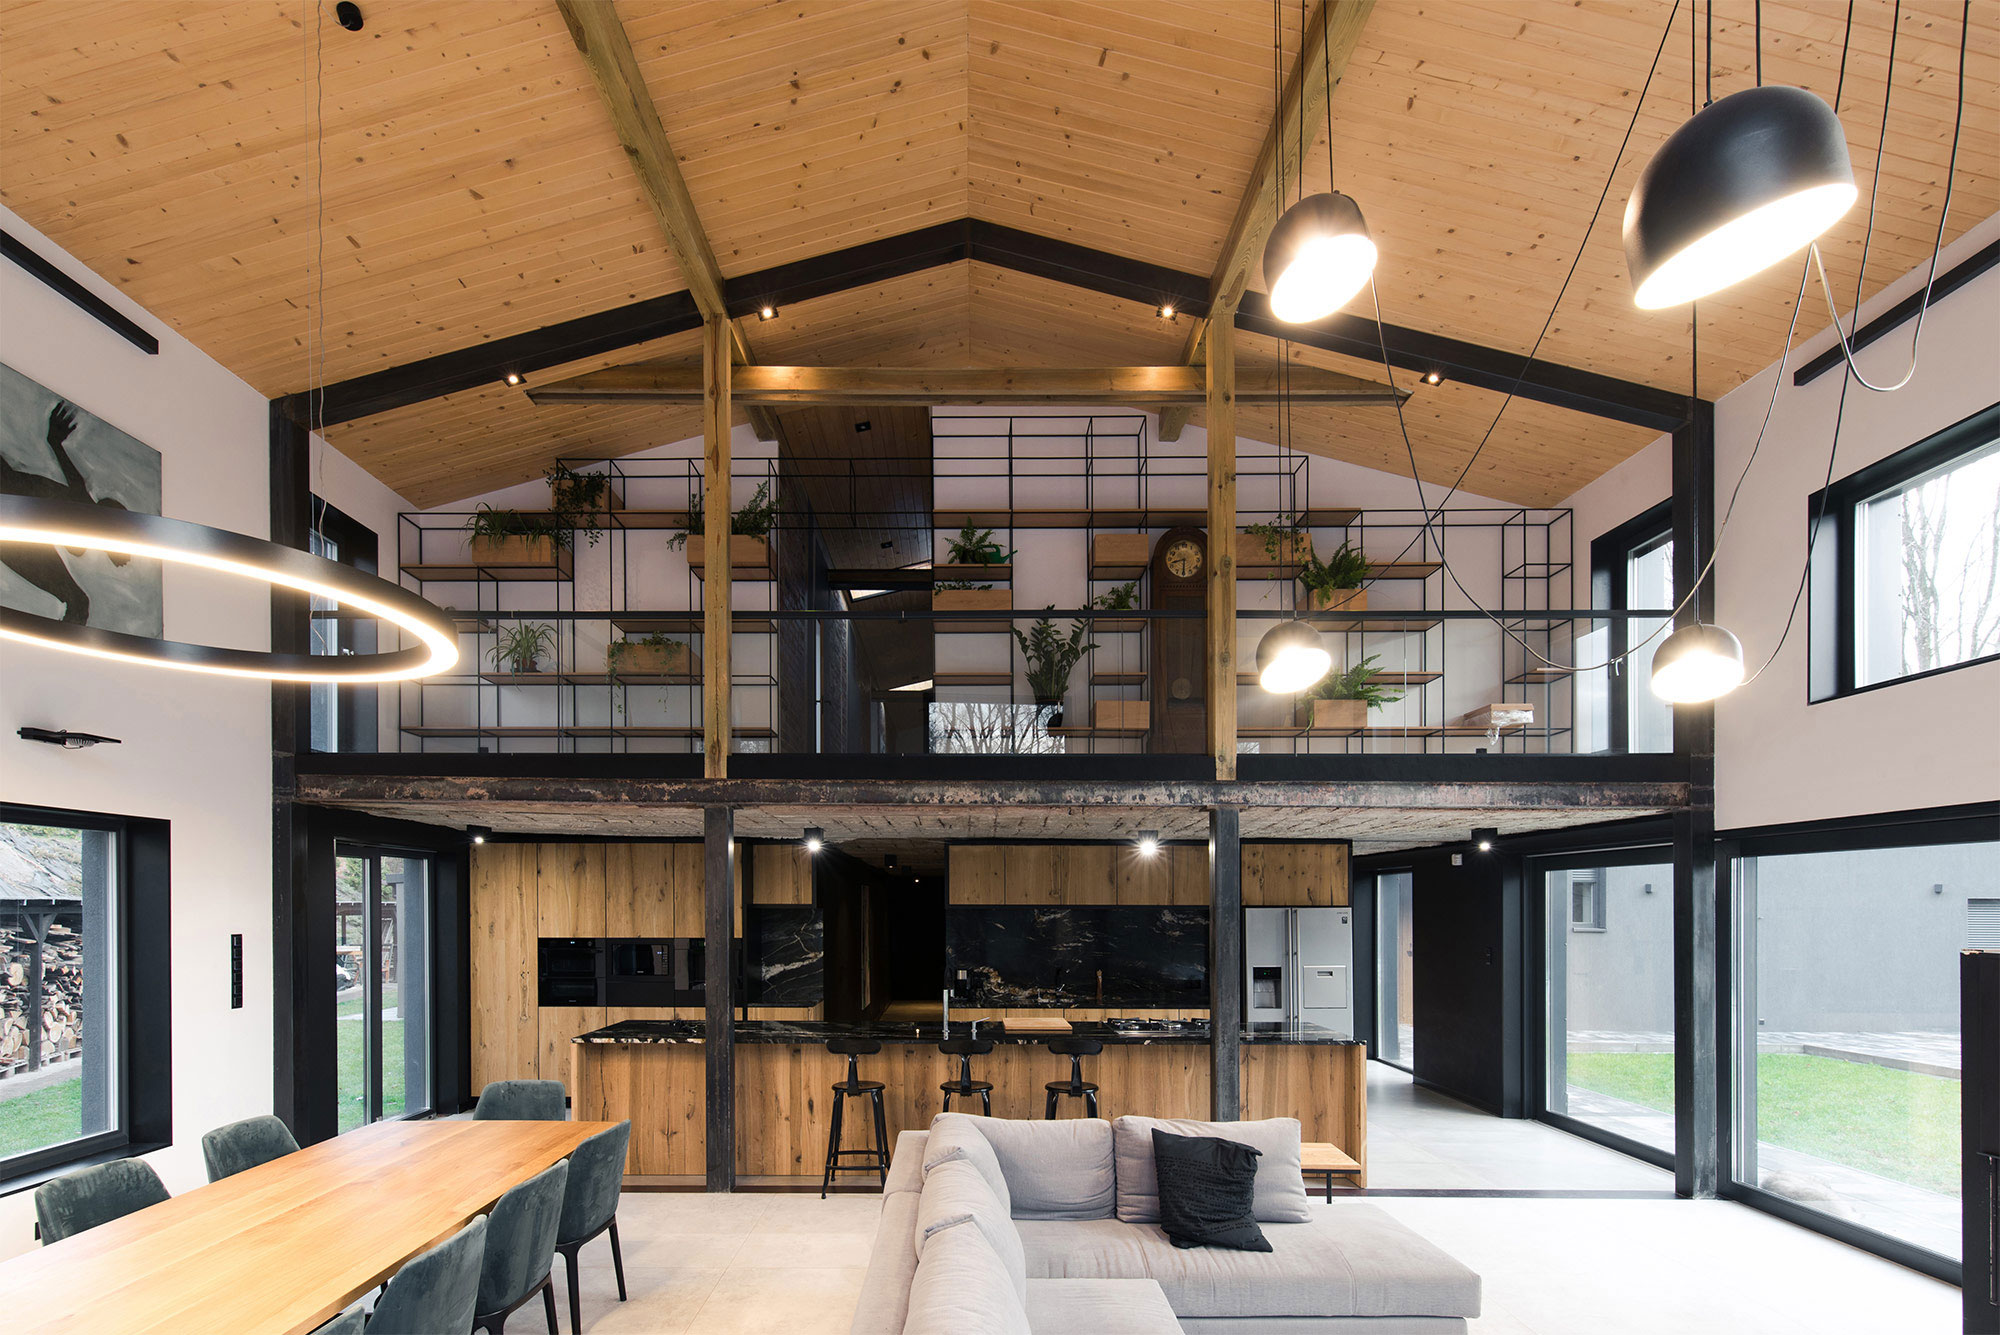 The new Silesian House by  mode:lina